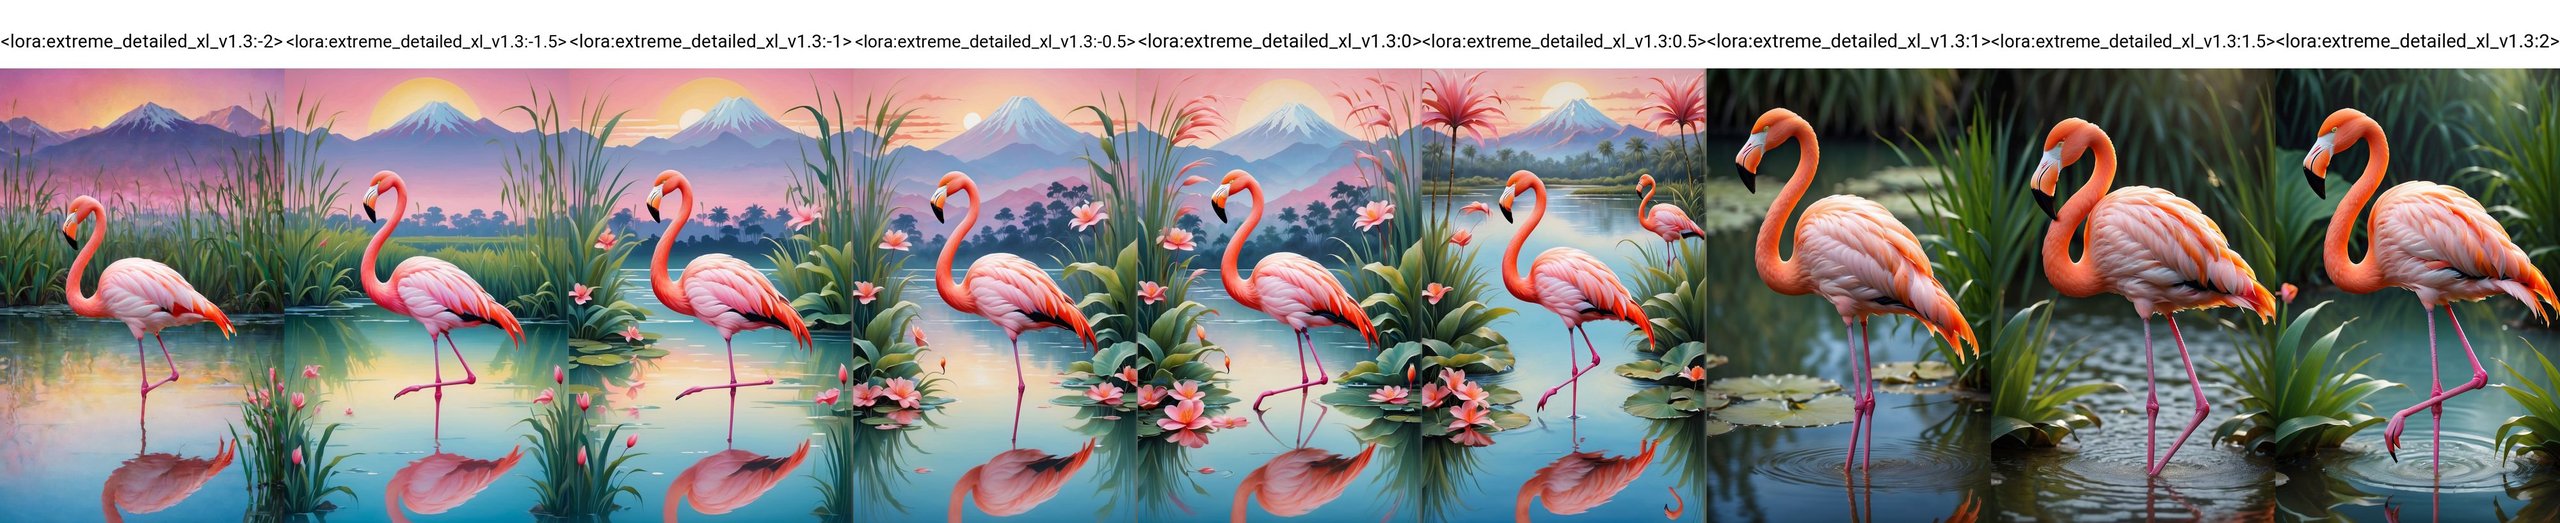 (best quality,8K,highres,masterpiece), ultra-detailed, (flamingo), a majestic flamingo standing gracefully amidst a tranquil wetland habitat. The flamingo's elegant posture and vibrant plumage are rendered with meticulous detail, capturing the beauty and grace of this iconic bird. The wetland backdrop is lush and serene, with tall grasses and gentle ripples in the water adding to the natural ambiance of the scene. The composition invites viewers to admire the flamingo's elegance and the tranquility of its surroundings.<lora:extreme_detailed_xl_v1.3:-2>